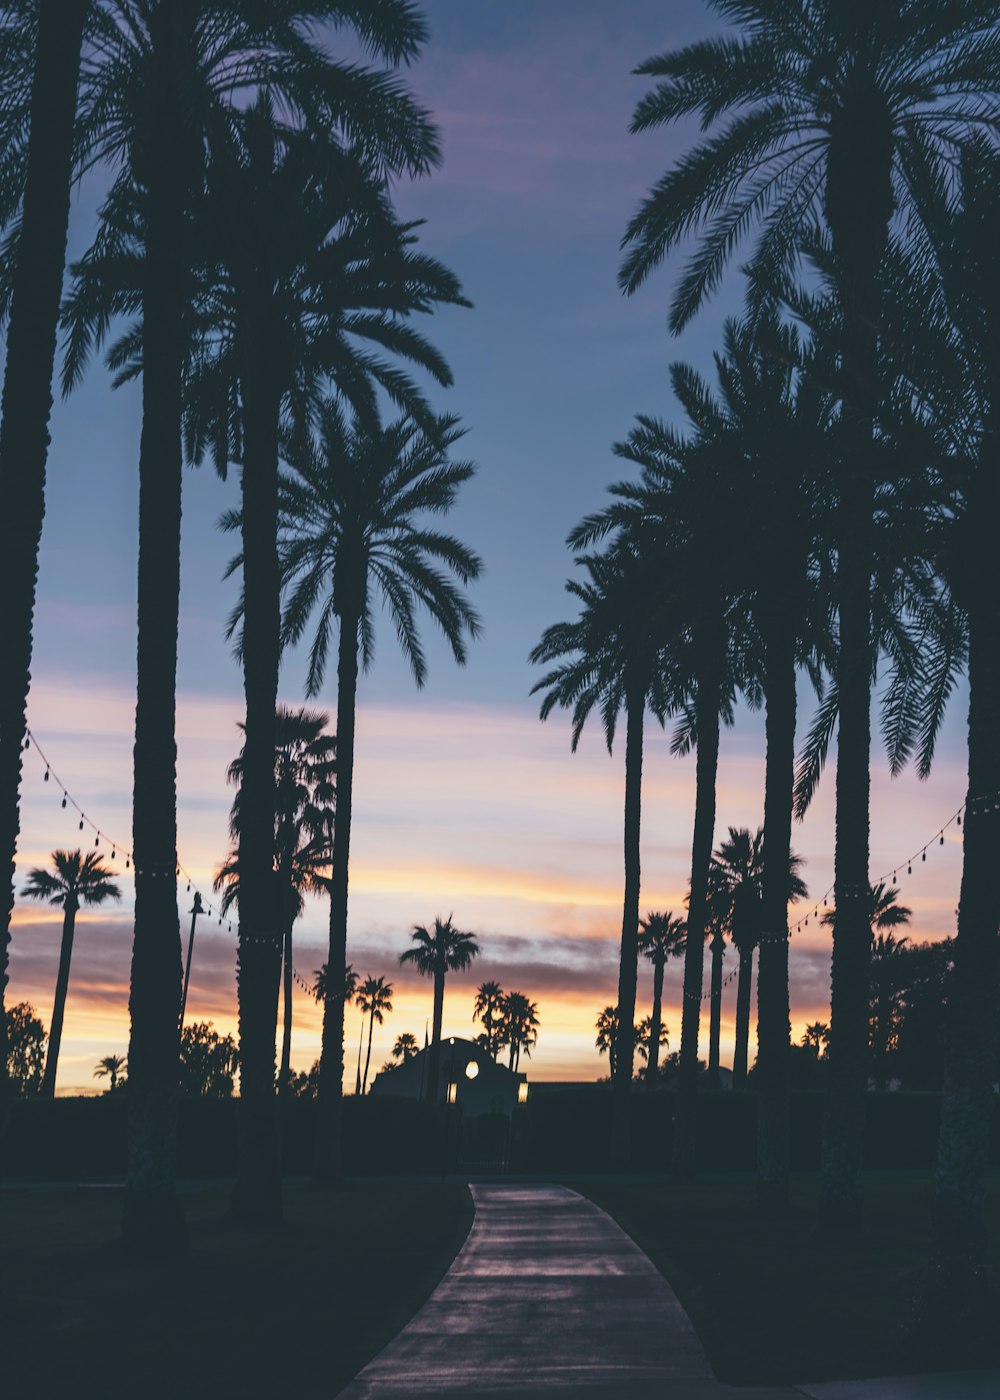 silhouette of houses beside palm trees and pathway